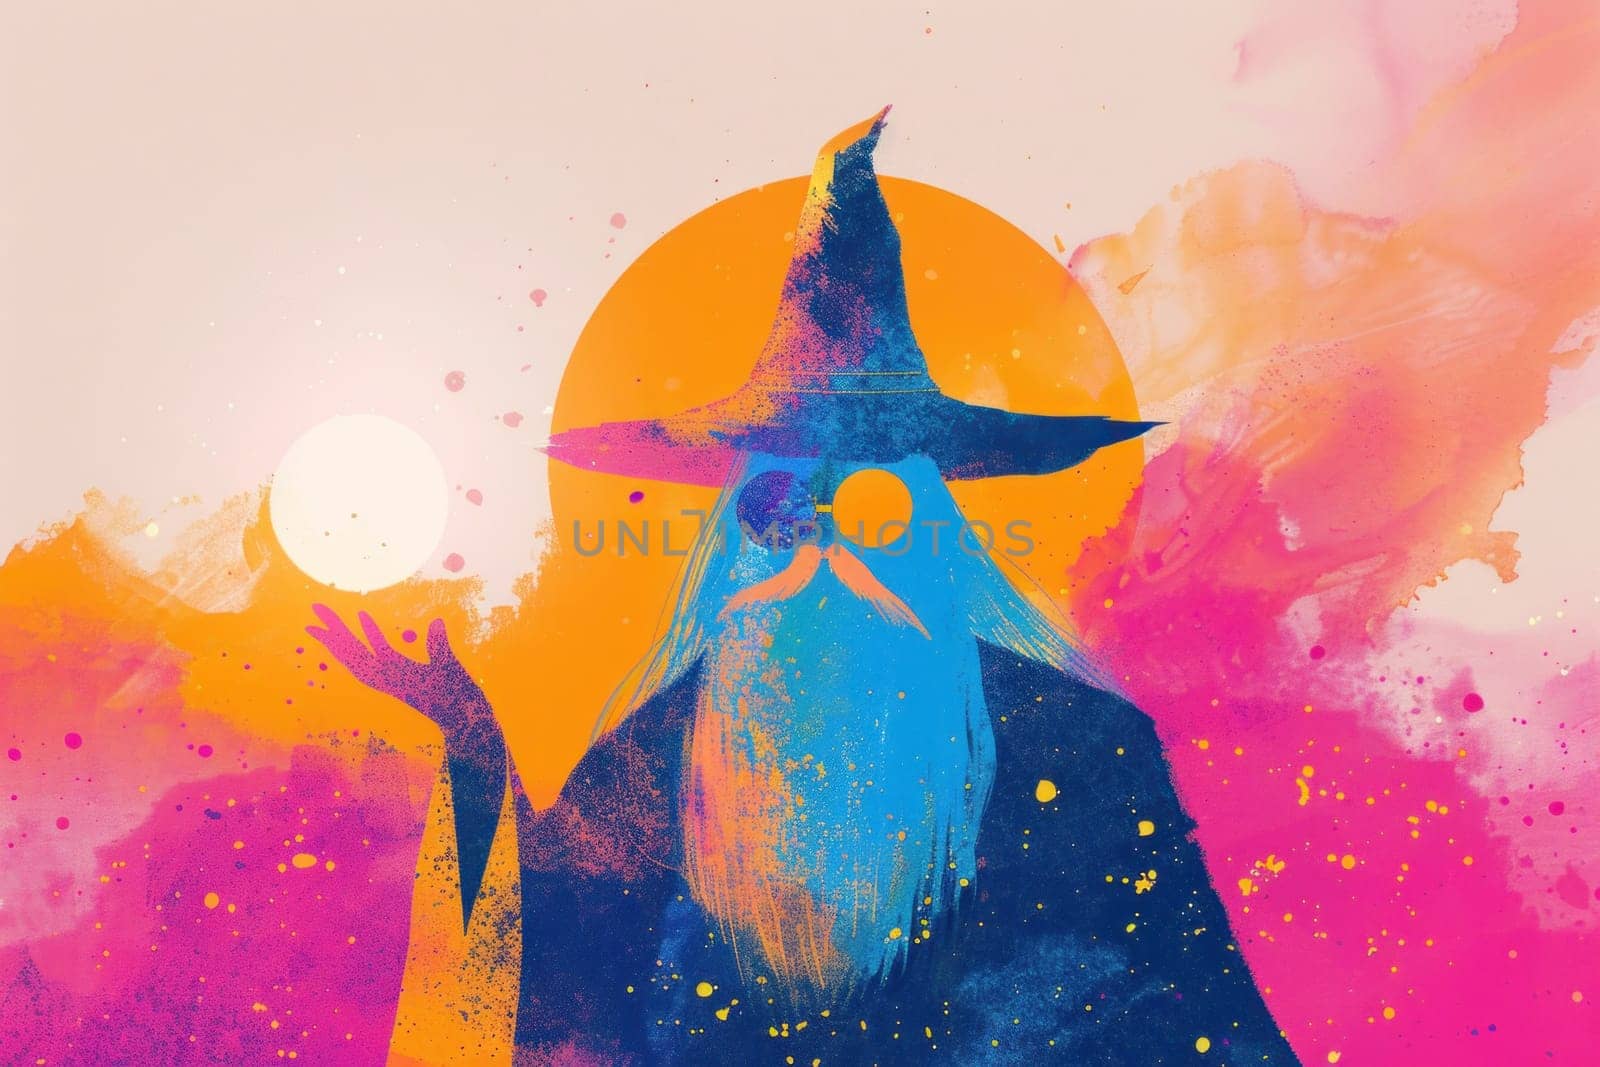 Wizard casting magical light spell against vibrant background for mystical fantasy art illustration by Vichizh